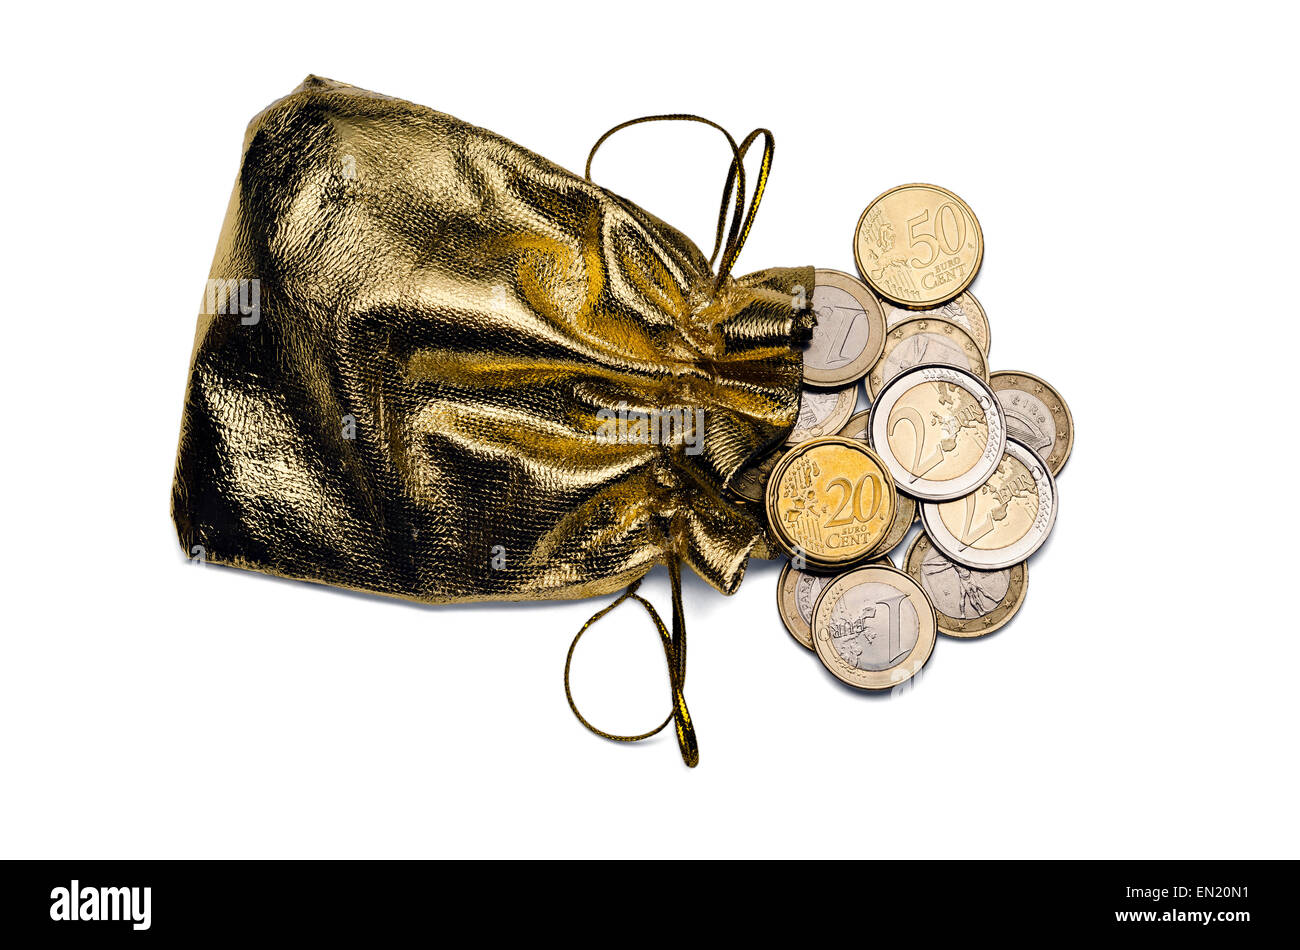 Isolated Golden Money Bag Full of  Euro Coins Stock Photo